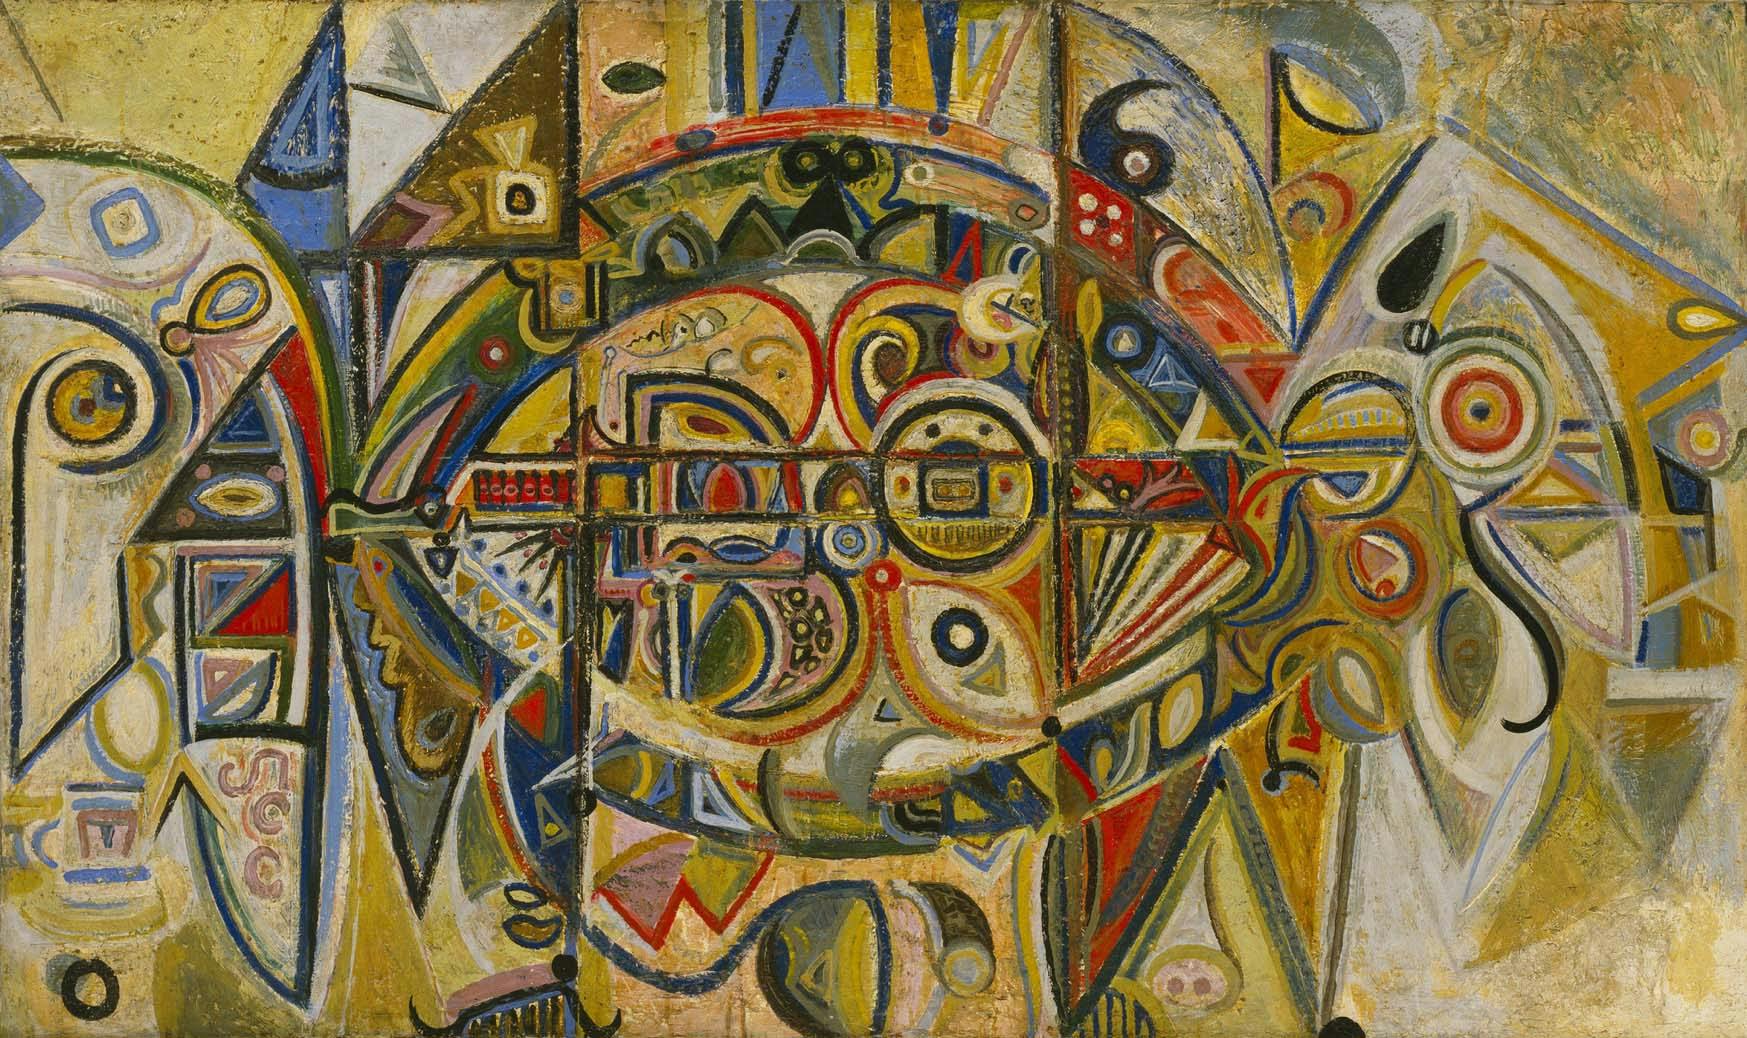 Desert
1940
Oil on canvas
43 x 72 in. (109.2 x 182.9 cm)  
The Museum of Modern Art, New York, Given anonymously (1099.1969)
 – The Richard Pousette-Dart Foundation